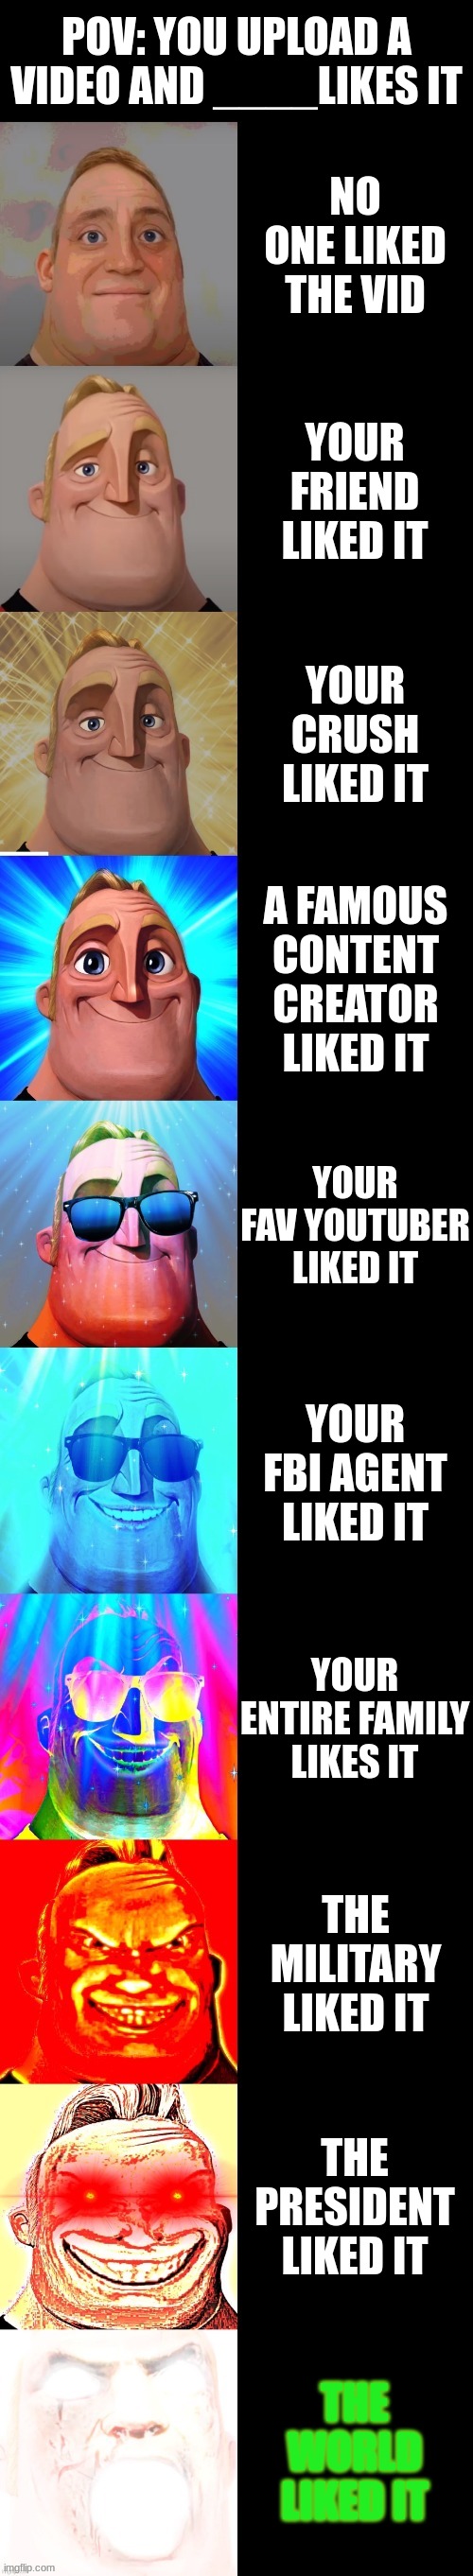 mr incredible becoming canny | POV: YOU UPLOAD A VIDEO AND ____LIKES IT; NO ONE LIKED THE VID; YOUR FRIEND LIKED IT; YOUR CRUSH LIKED IT; A FAMOUS CONTENT CREATOR LIKED IT; YOUR FAV YOUTUBER LIKED IT; YOUR FBI AGENT LIKED IT; YOUR ENTIRE FAMILY LIKES IT; THE MILITARY LIKED IT; THE PRESIDENT LIKED IT; THE WORLD LIKED IT | image tagged in mr incredible becoming canny | made w/ Imgflip meme maker